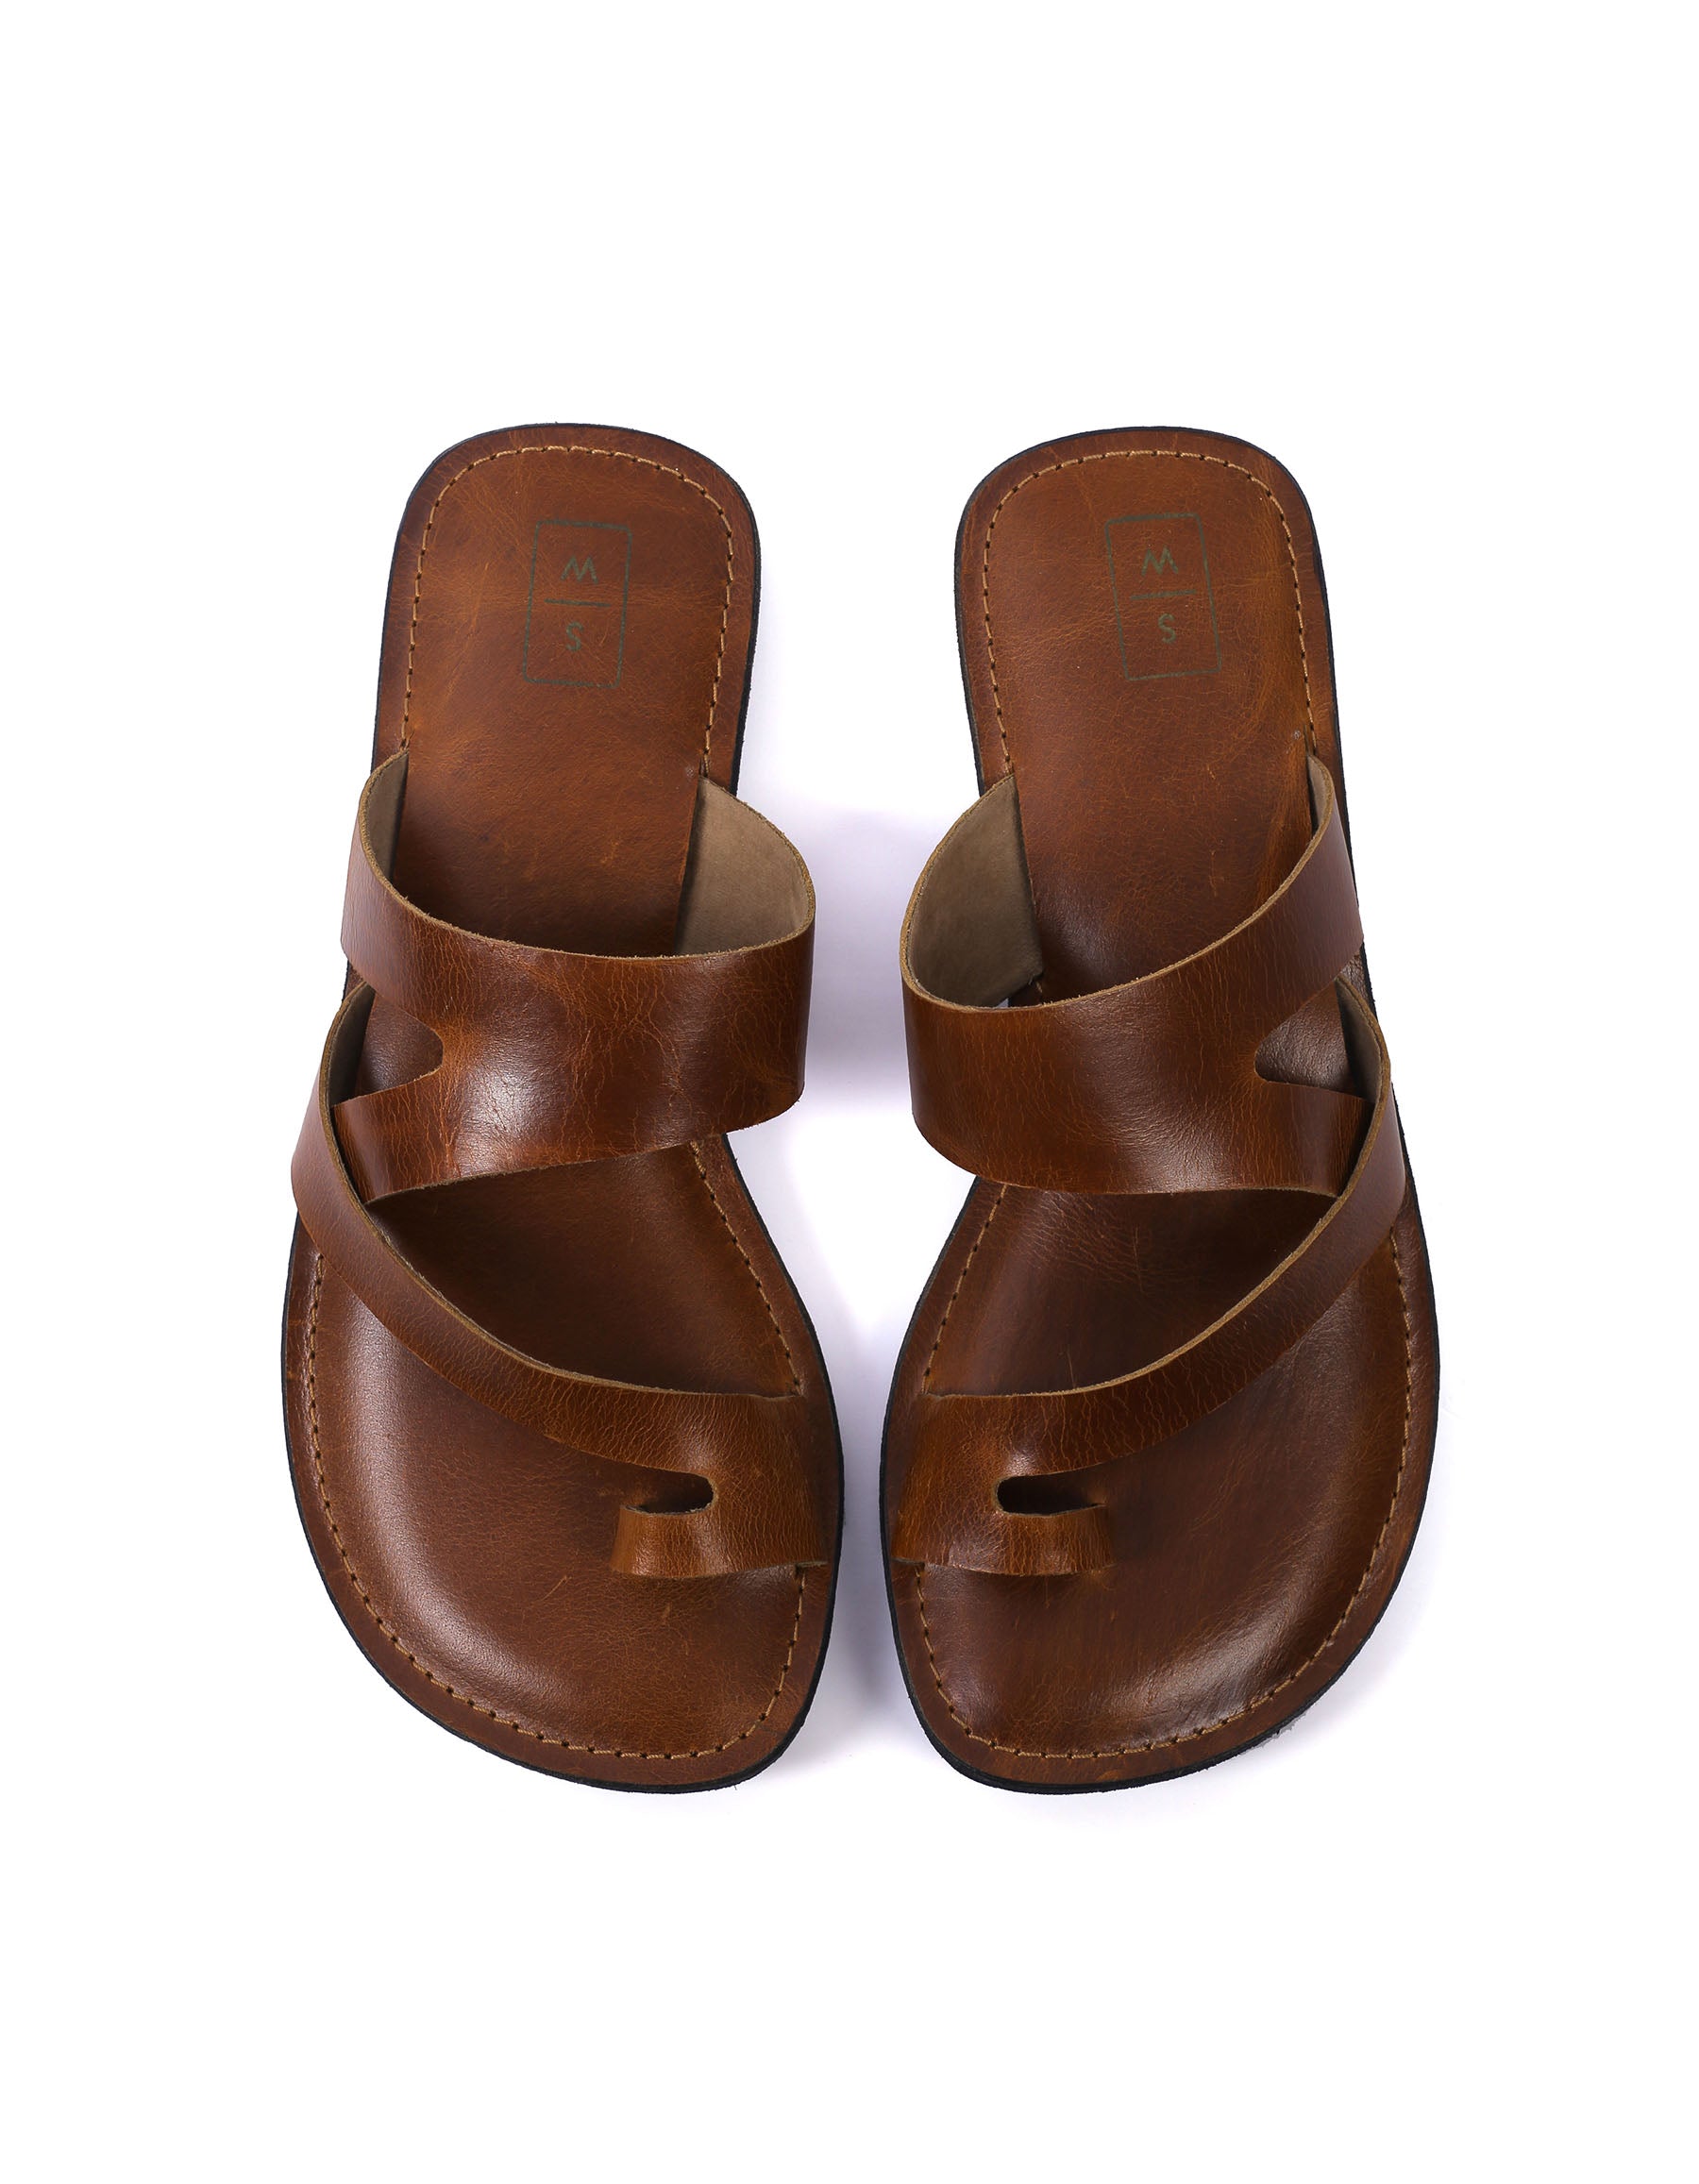 Details more than 277 mens brown leather slippers best